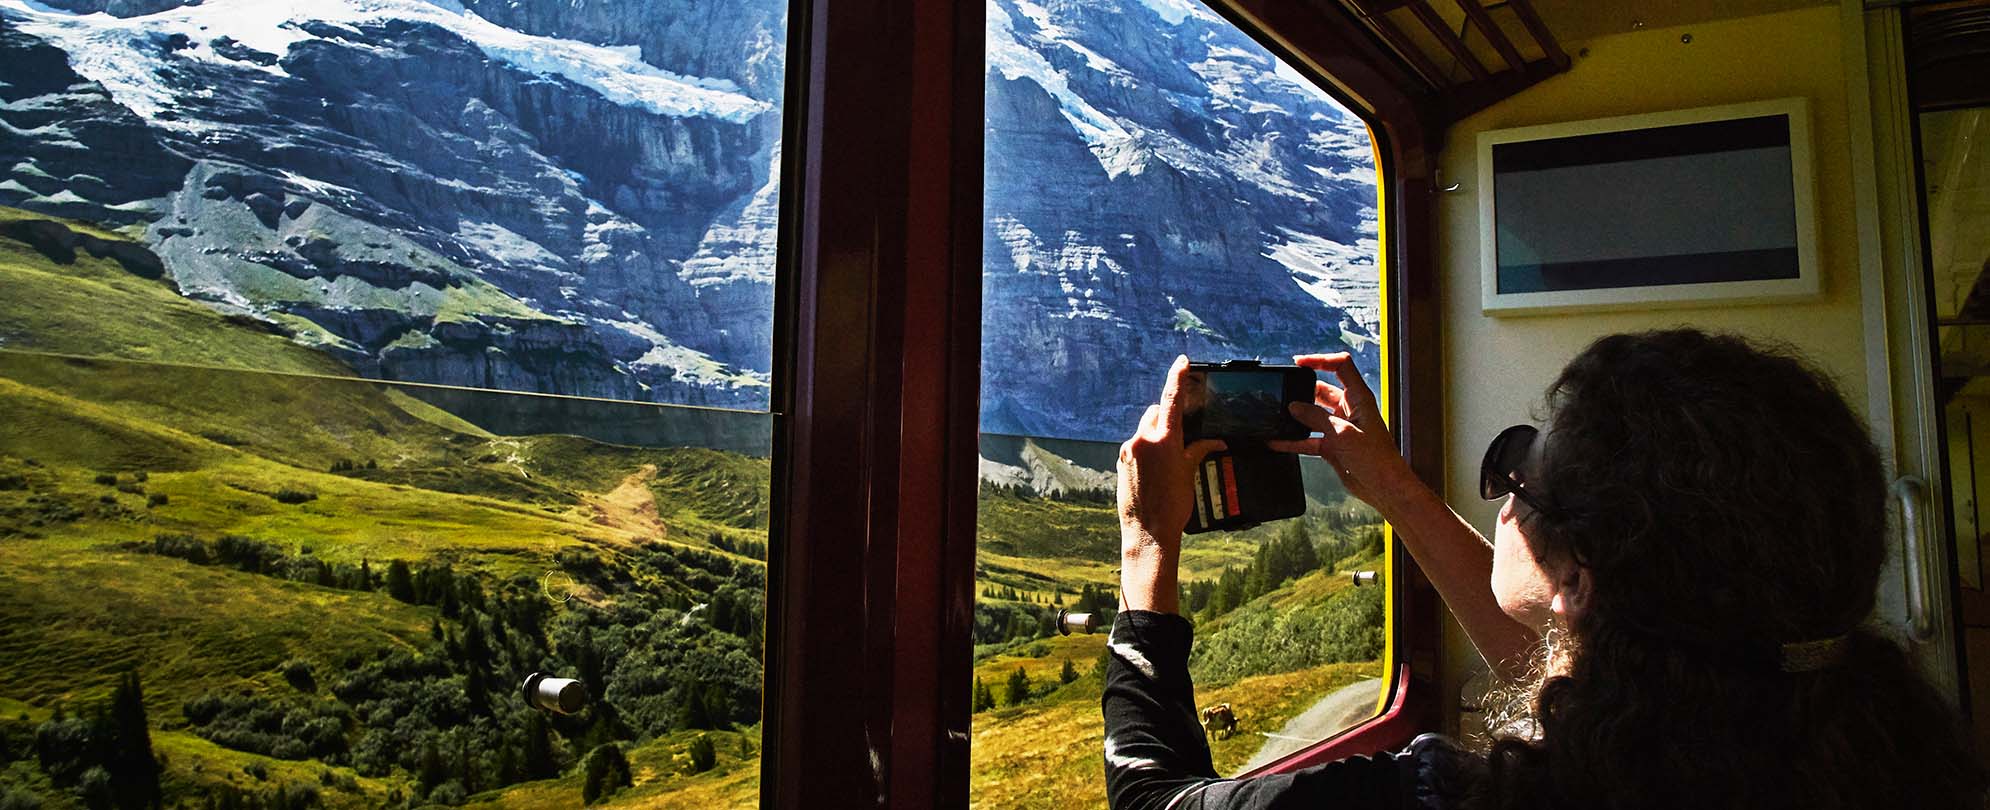 A woman, inside a train, taking a photo with her phone of the snow-covered mountains.